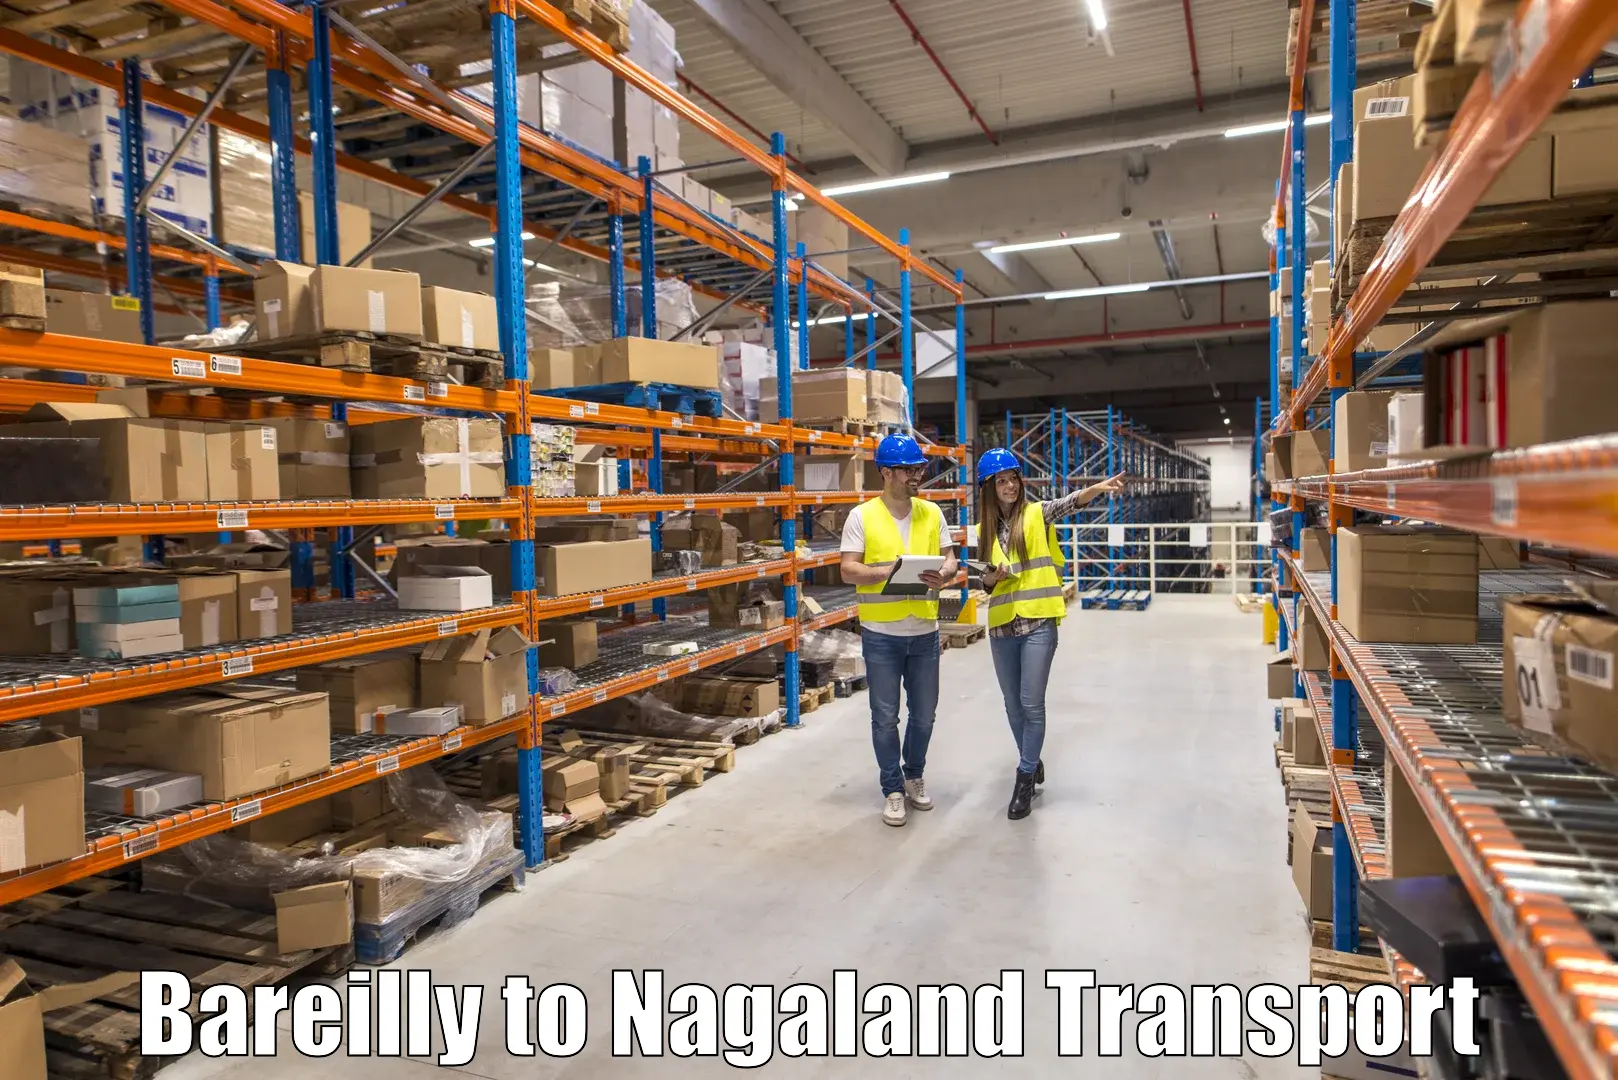 Lorry transport service Bareilly to Nagaland